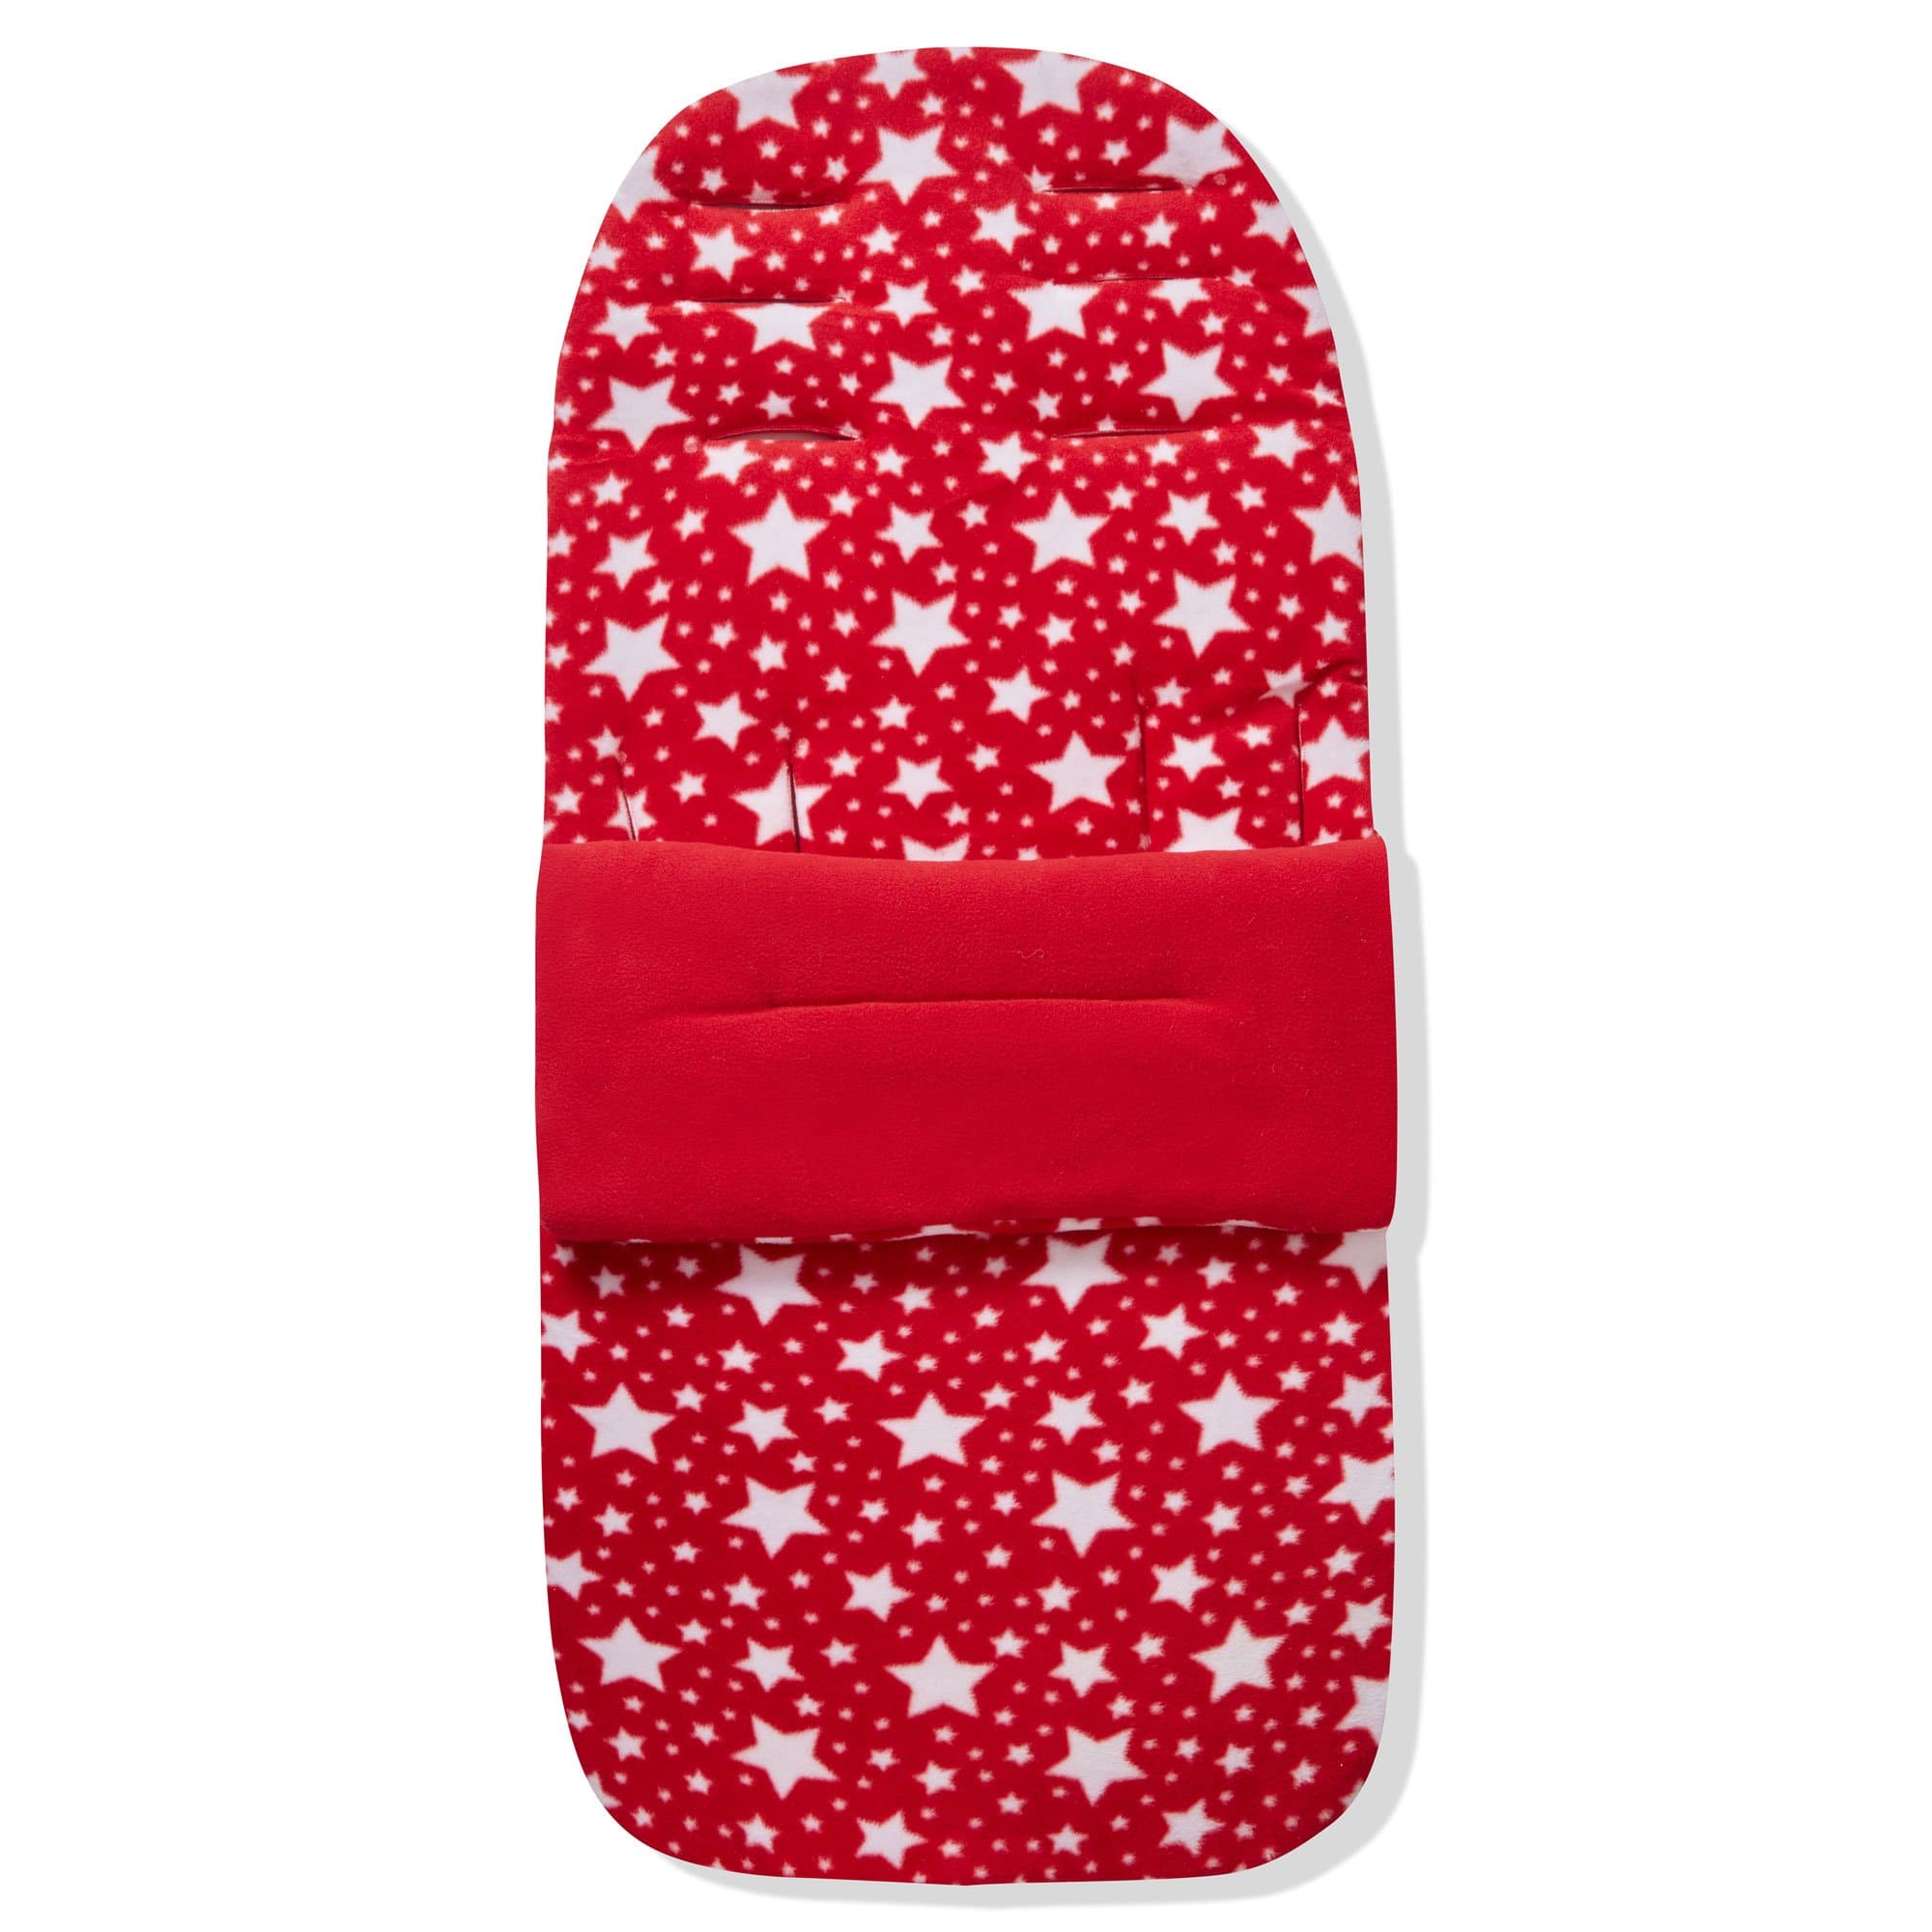 Fleece Footmuff / Cosy Toes Compatible with Casual - For Your Little One